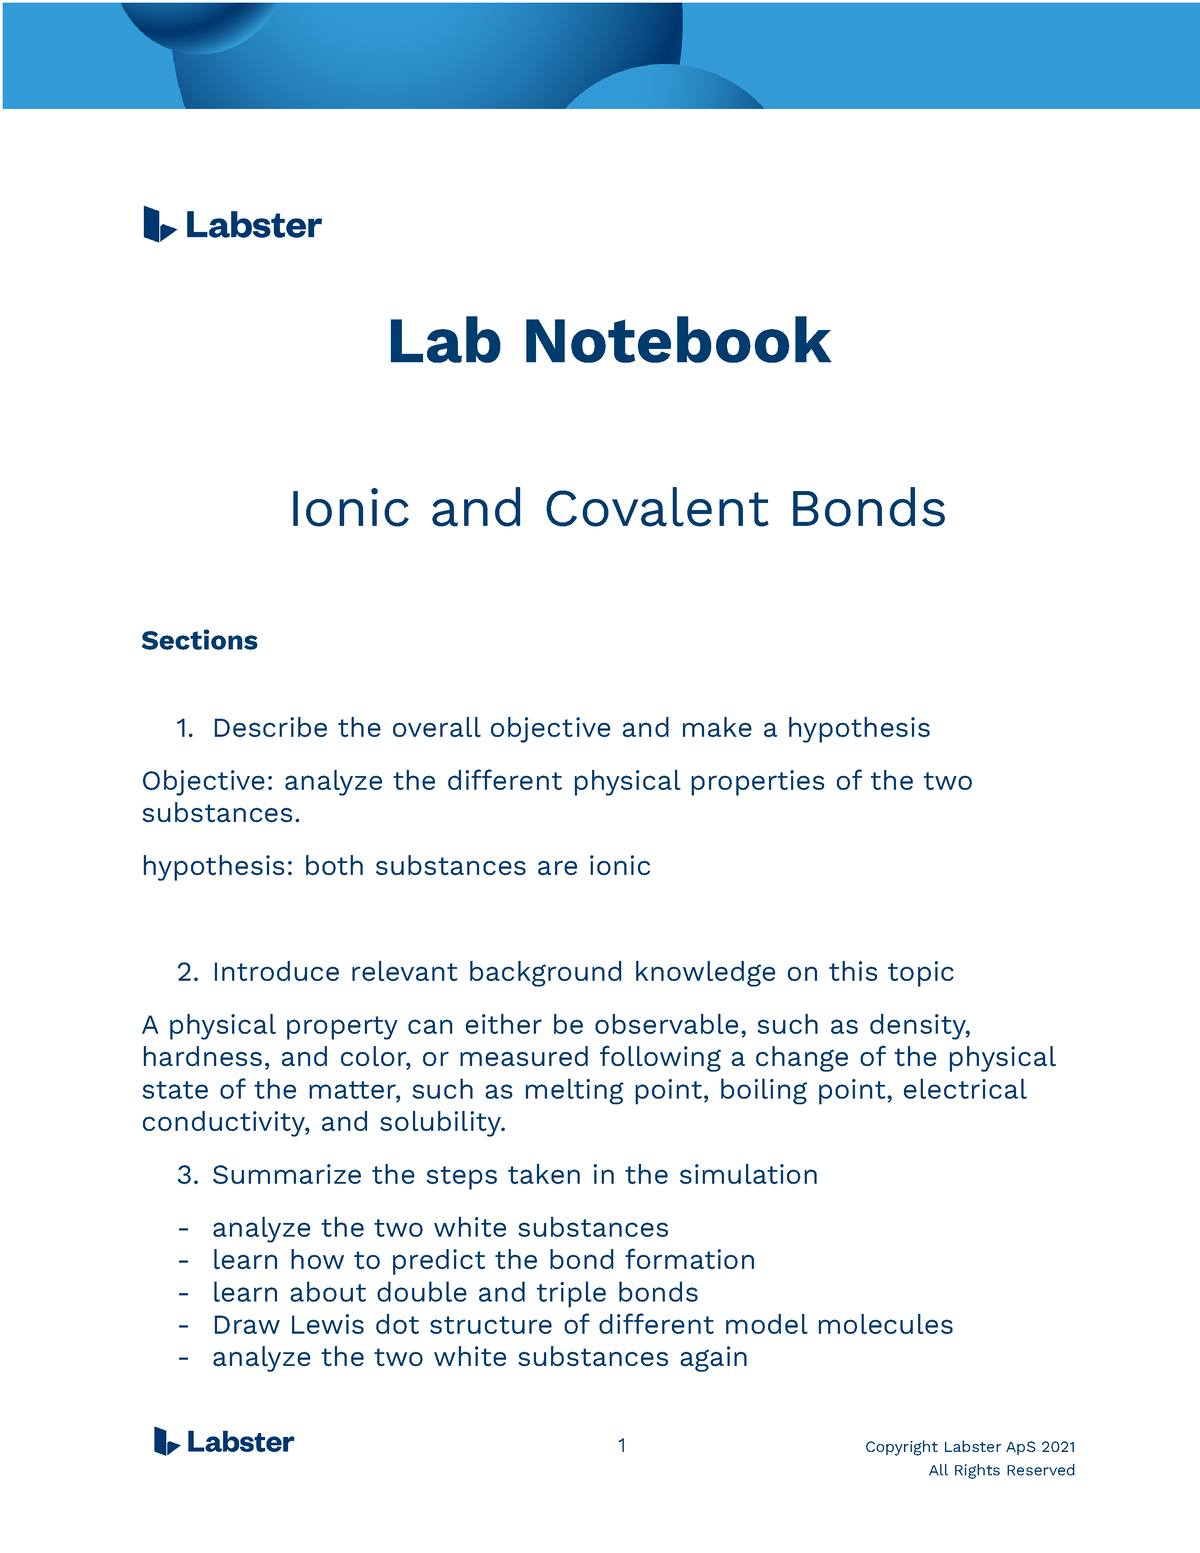 labs-notes-with-dr-white-lab-notebook-ionic-and-covalent-bonds-sections-describe-the